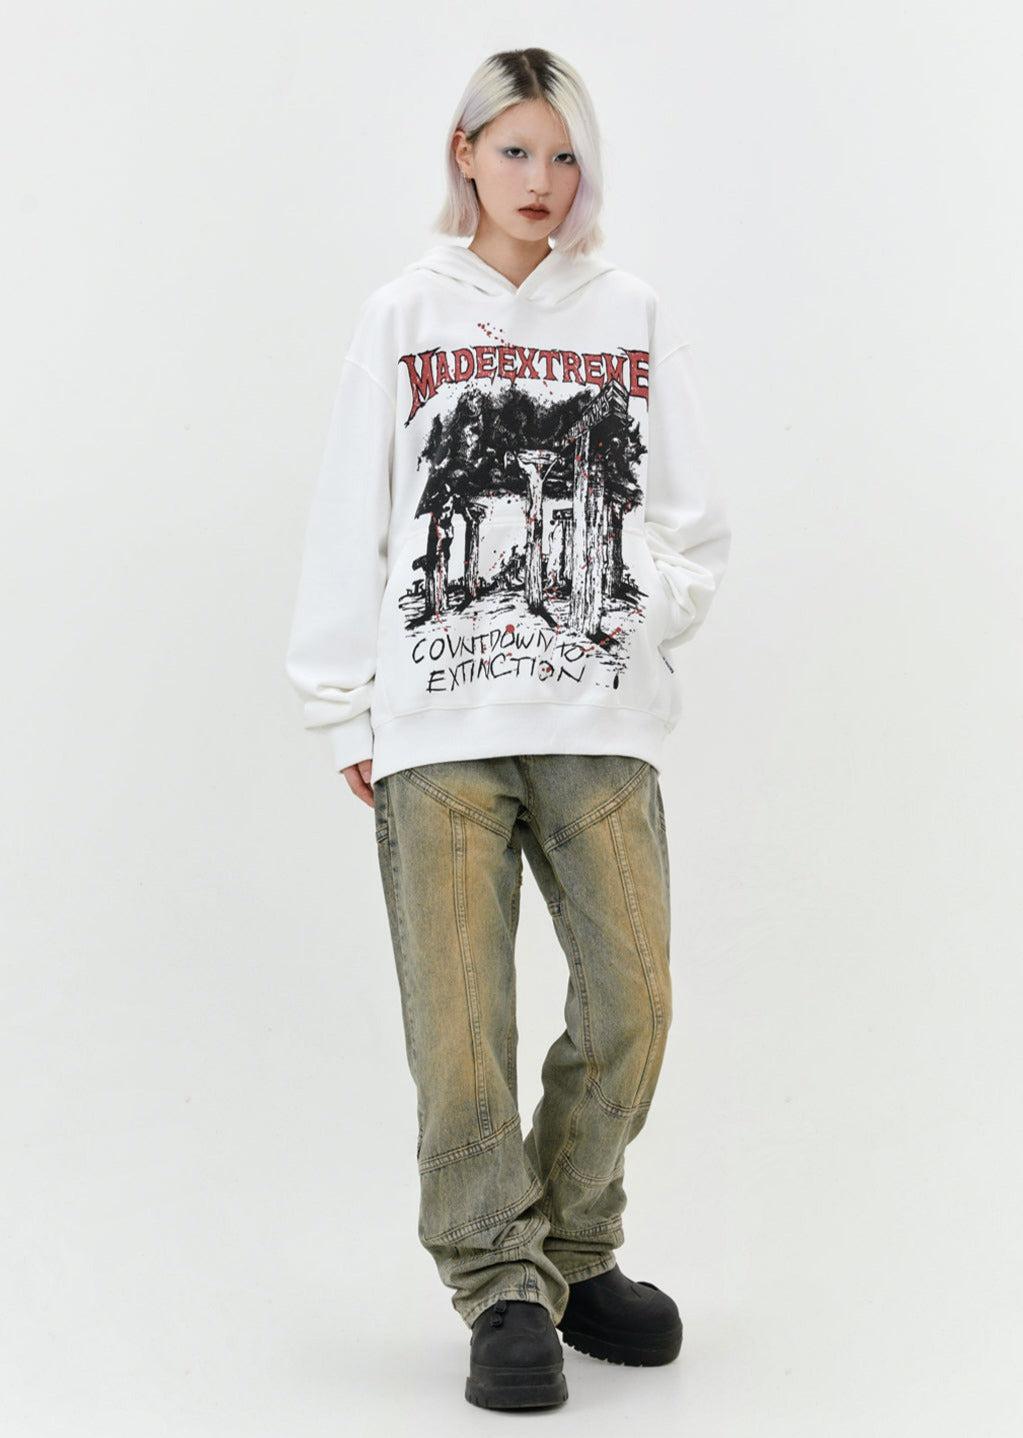 Countdown To Extinction Graphic Hoodie Korean Street Fashion Hoodie By Made Extreme Shop Online at OH Vault